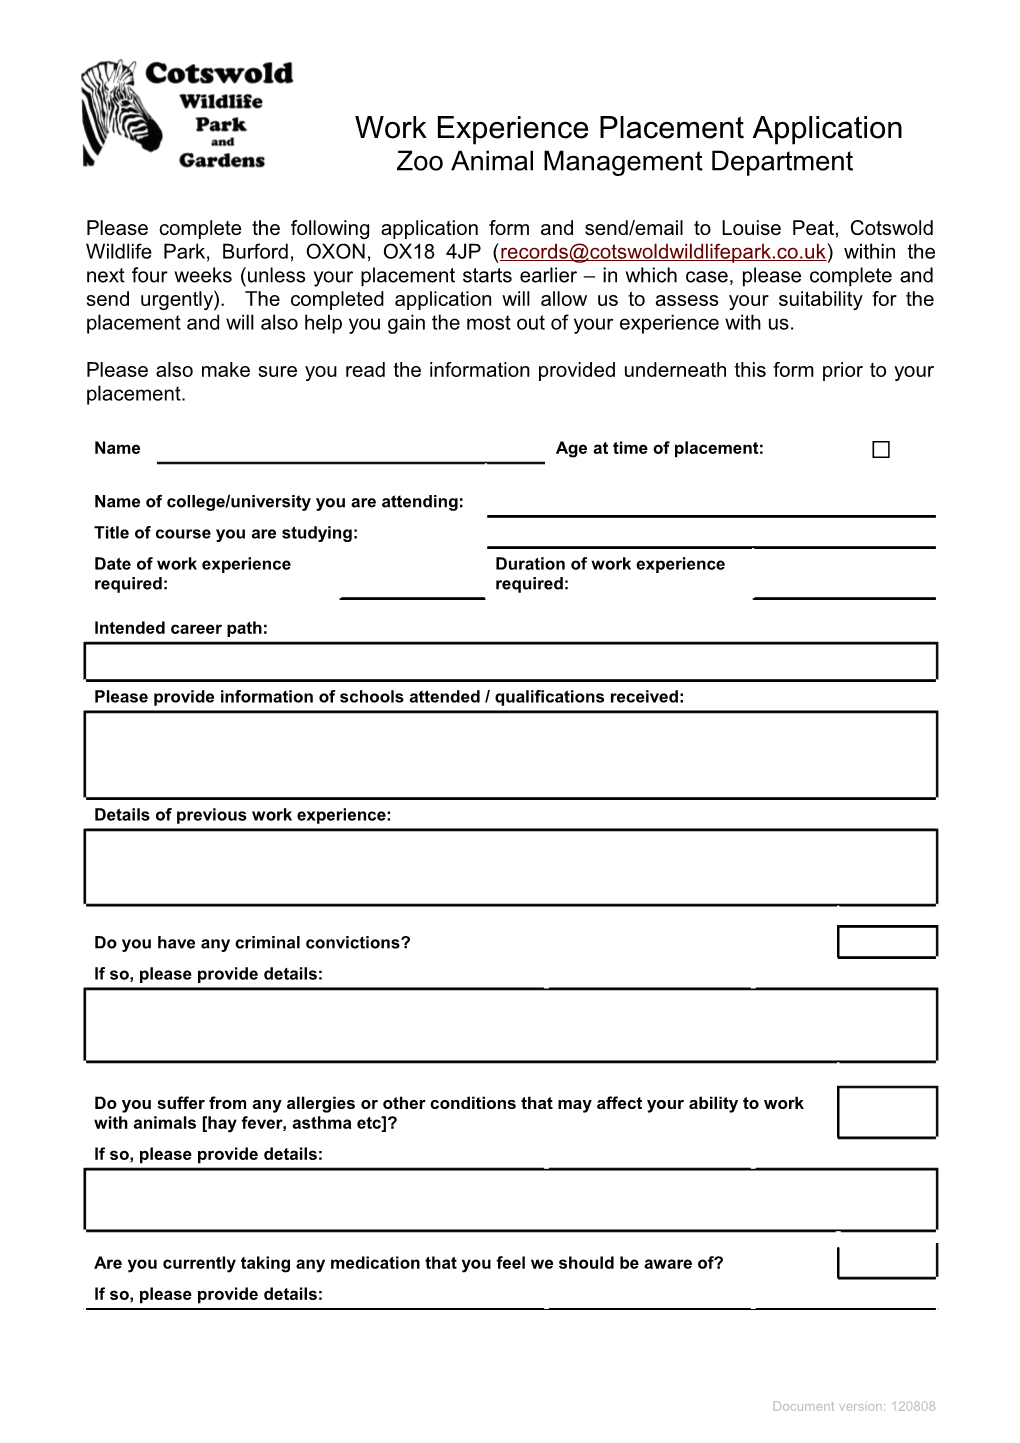 Work Experience Placement Application